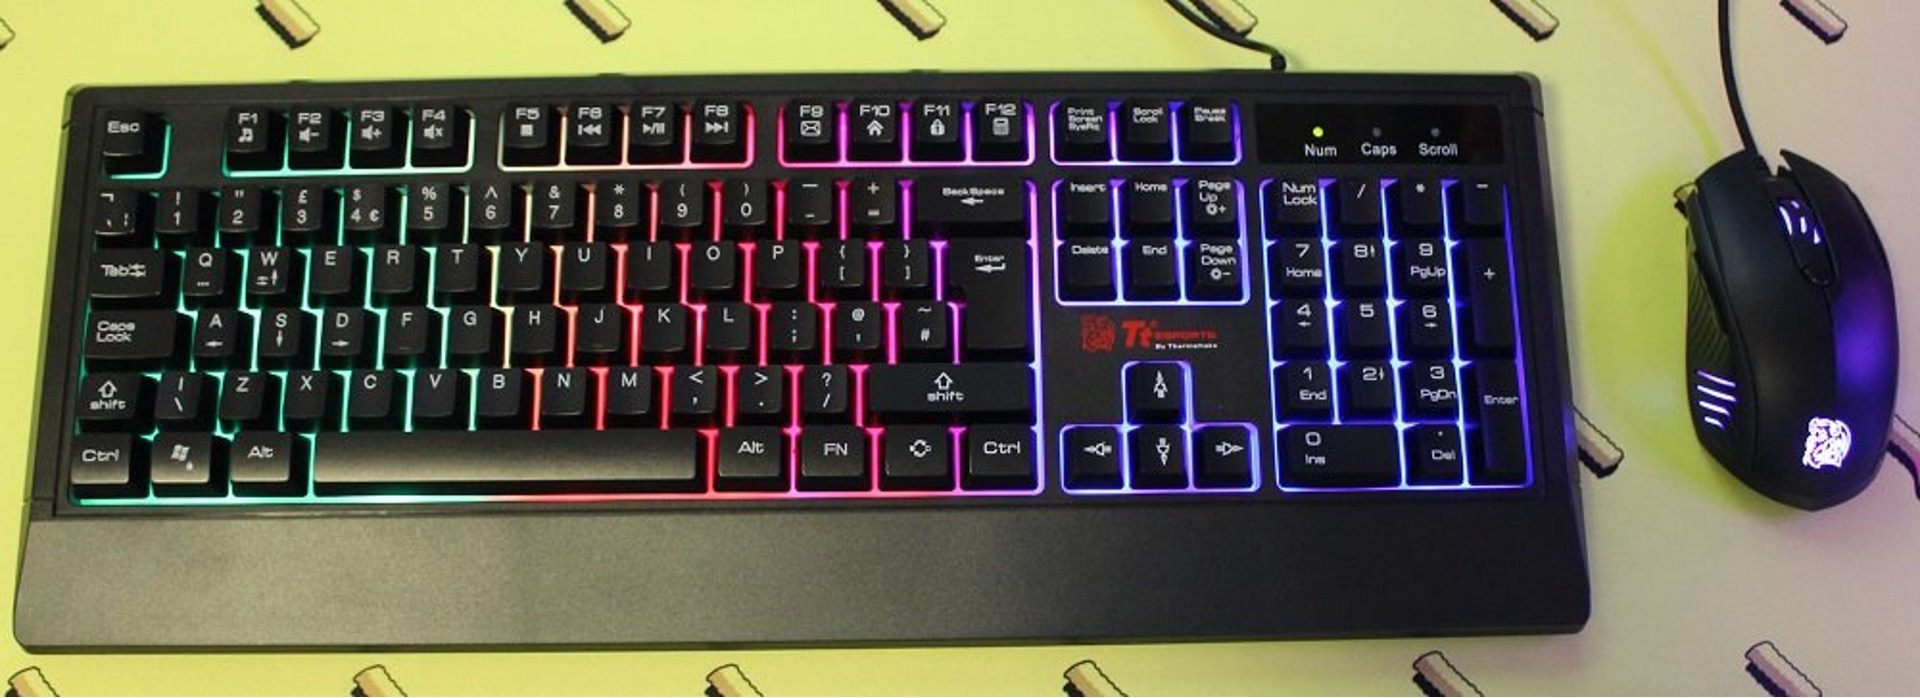 How To Control Lighting On A Challenger Gaming Keyboard